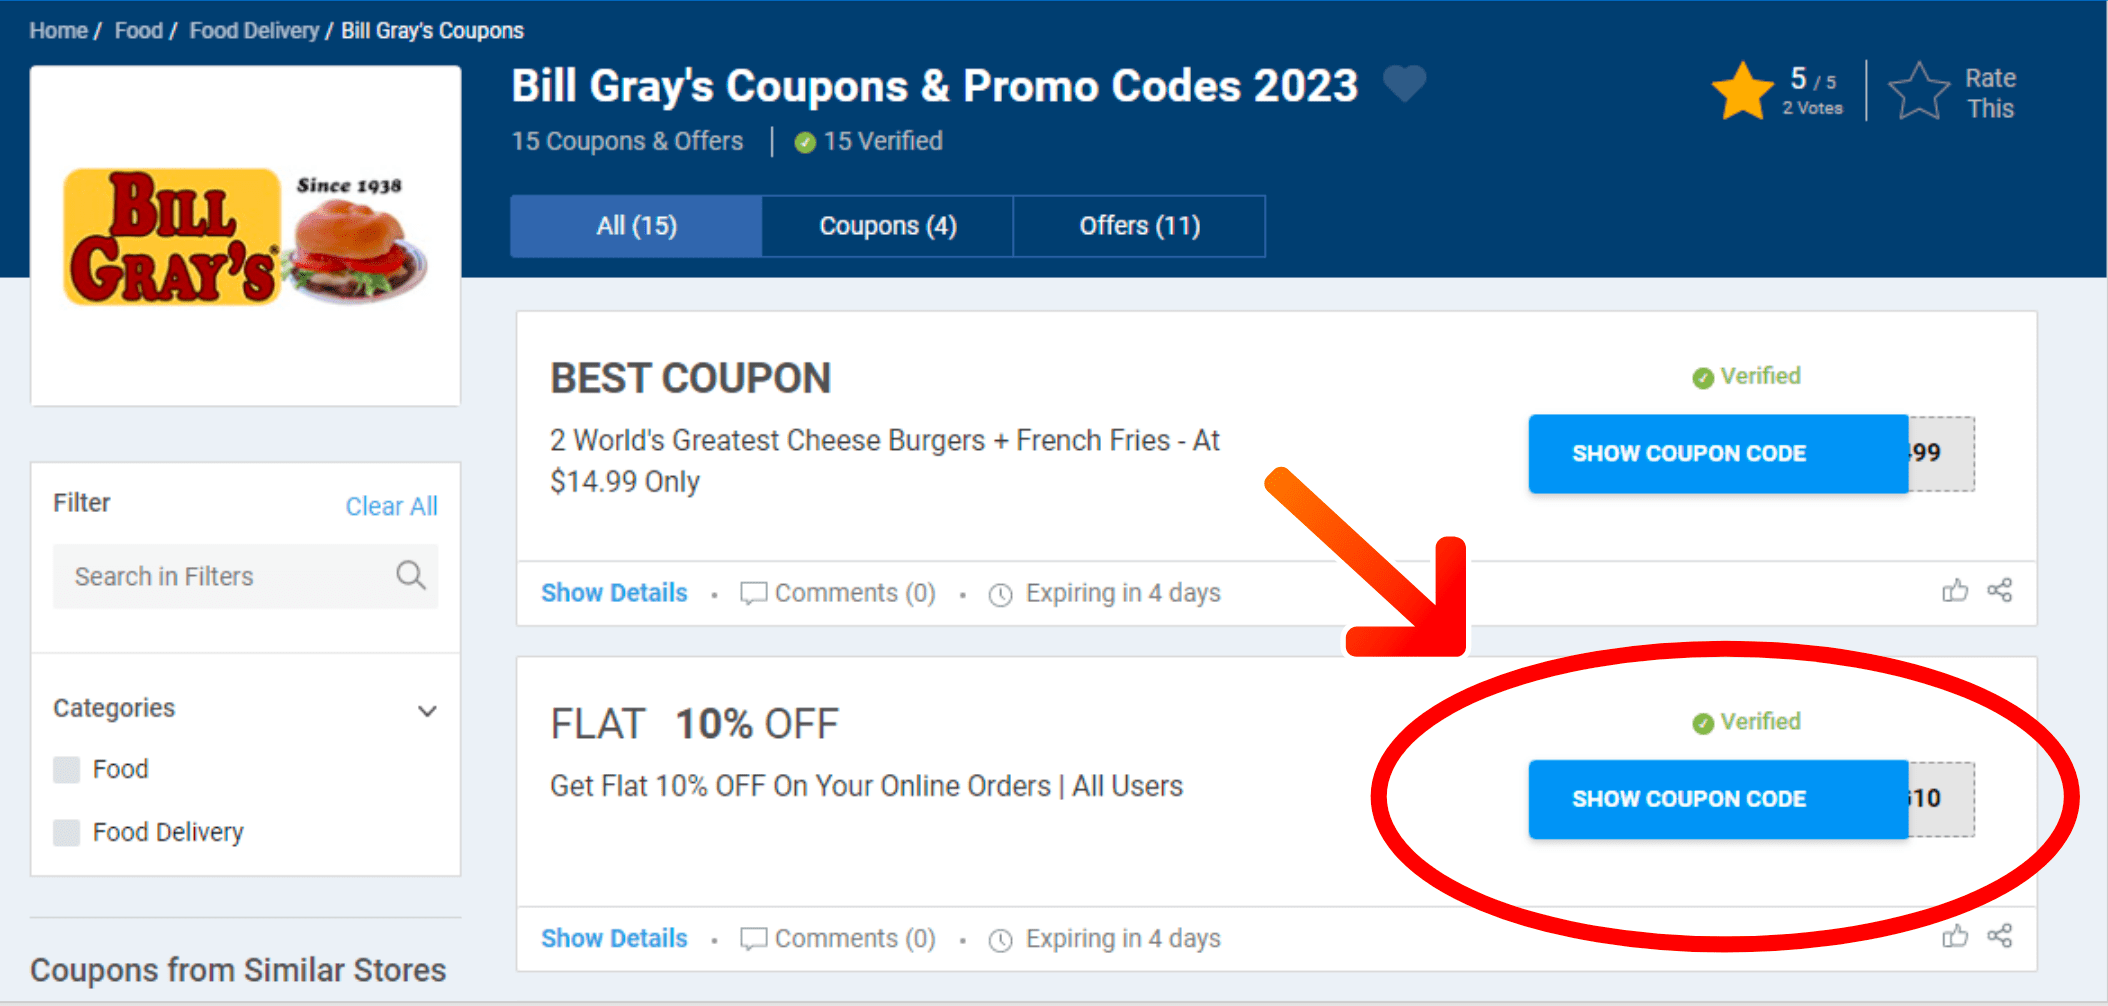 Bill Gray's Coupons 2023 Flat 10 OFF Promo Codes Today